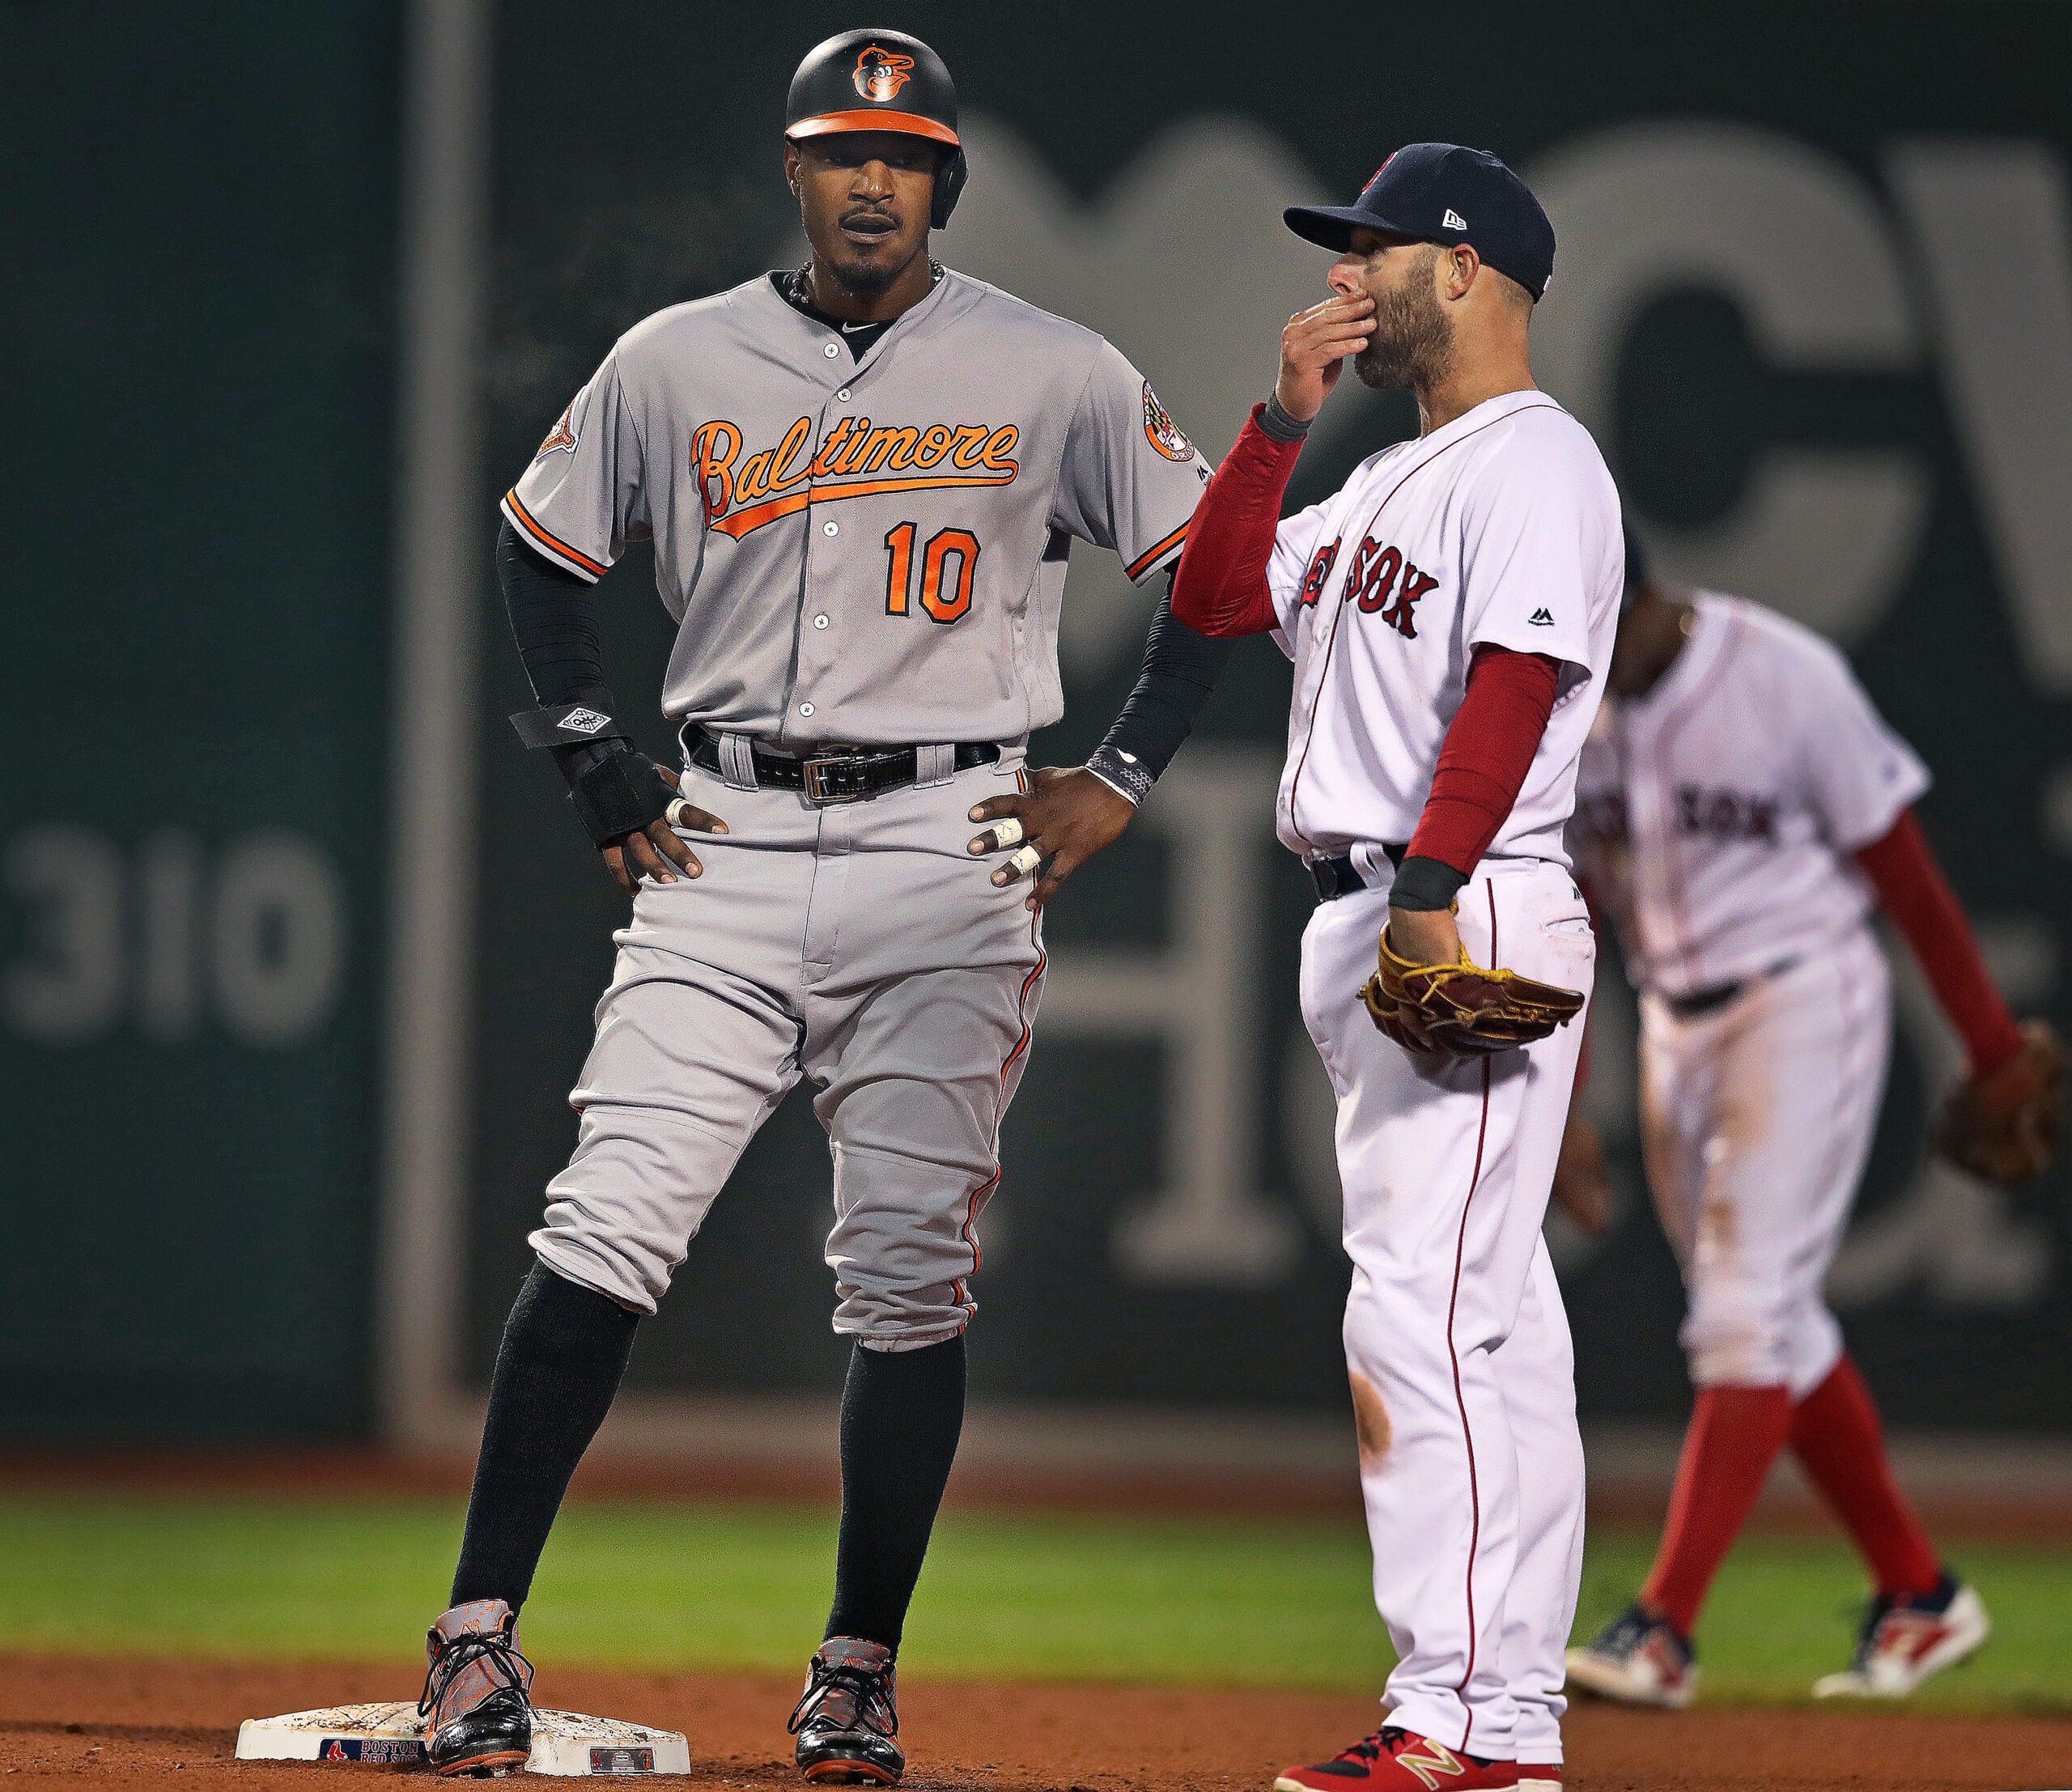 Here's the Red Sox apology to Adam Jones and the Orioles